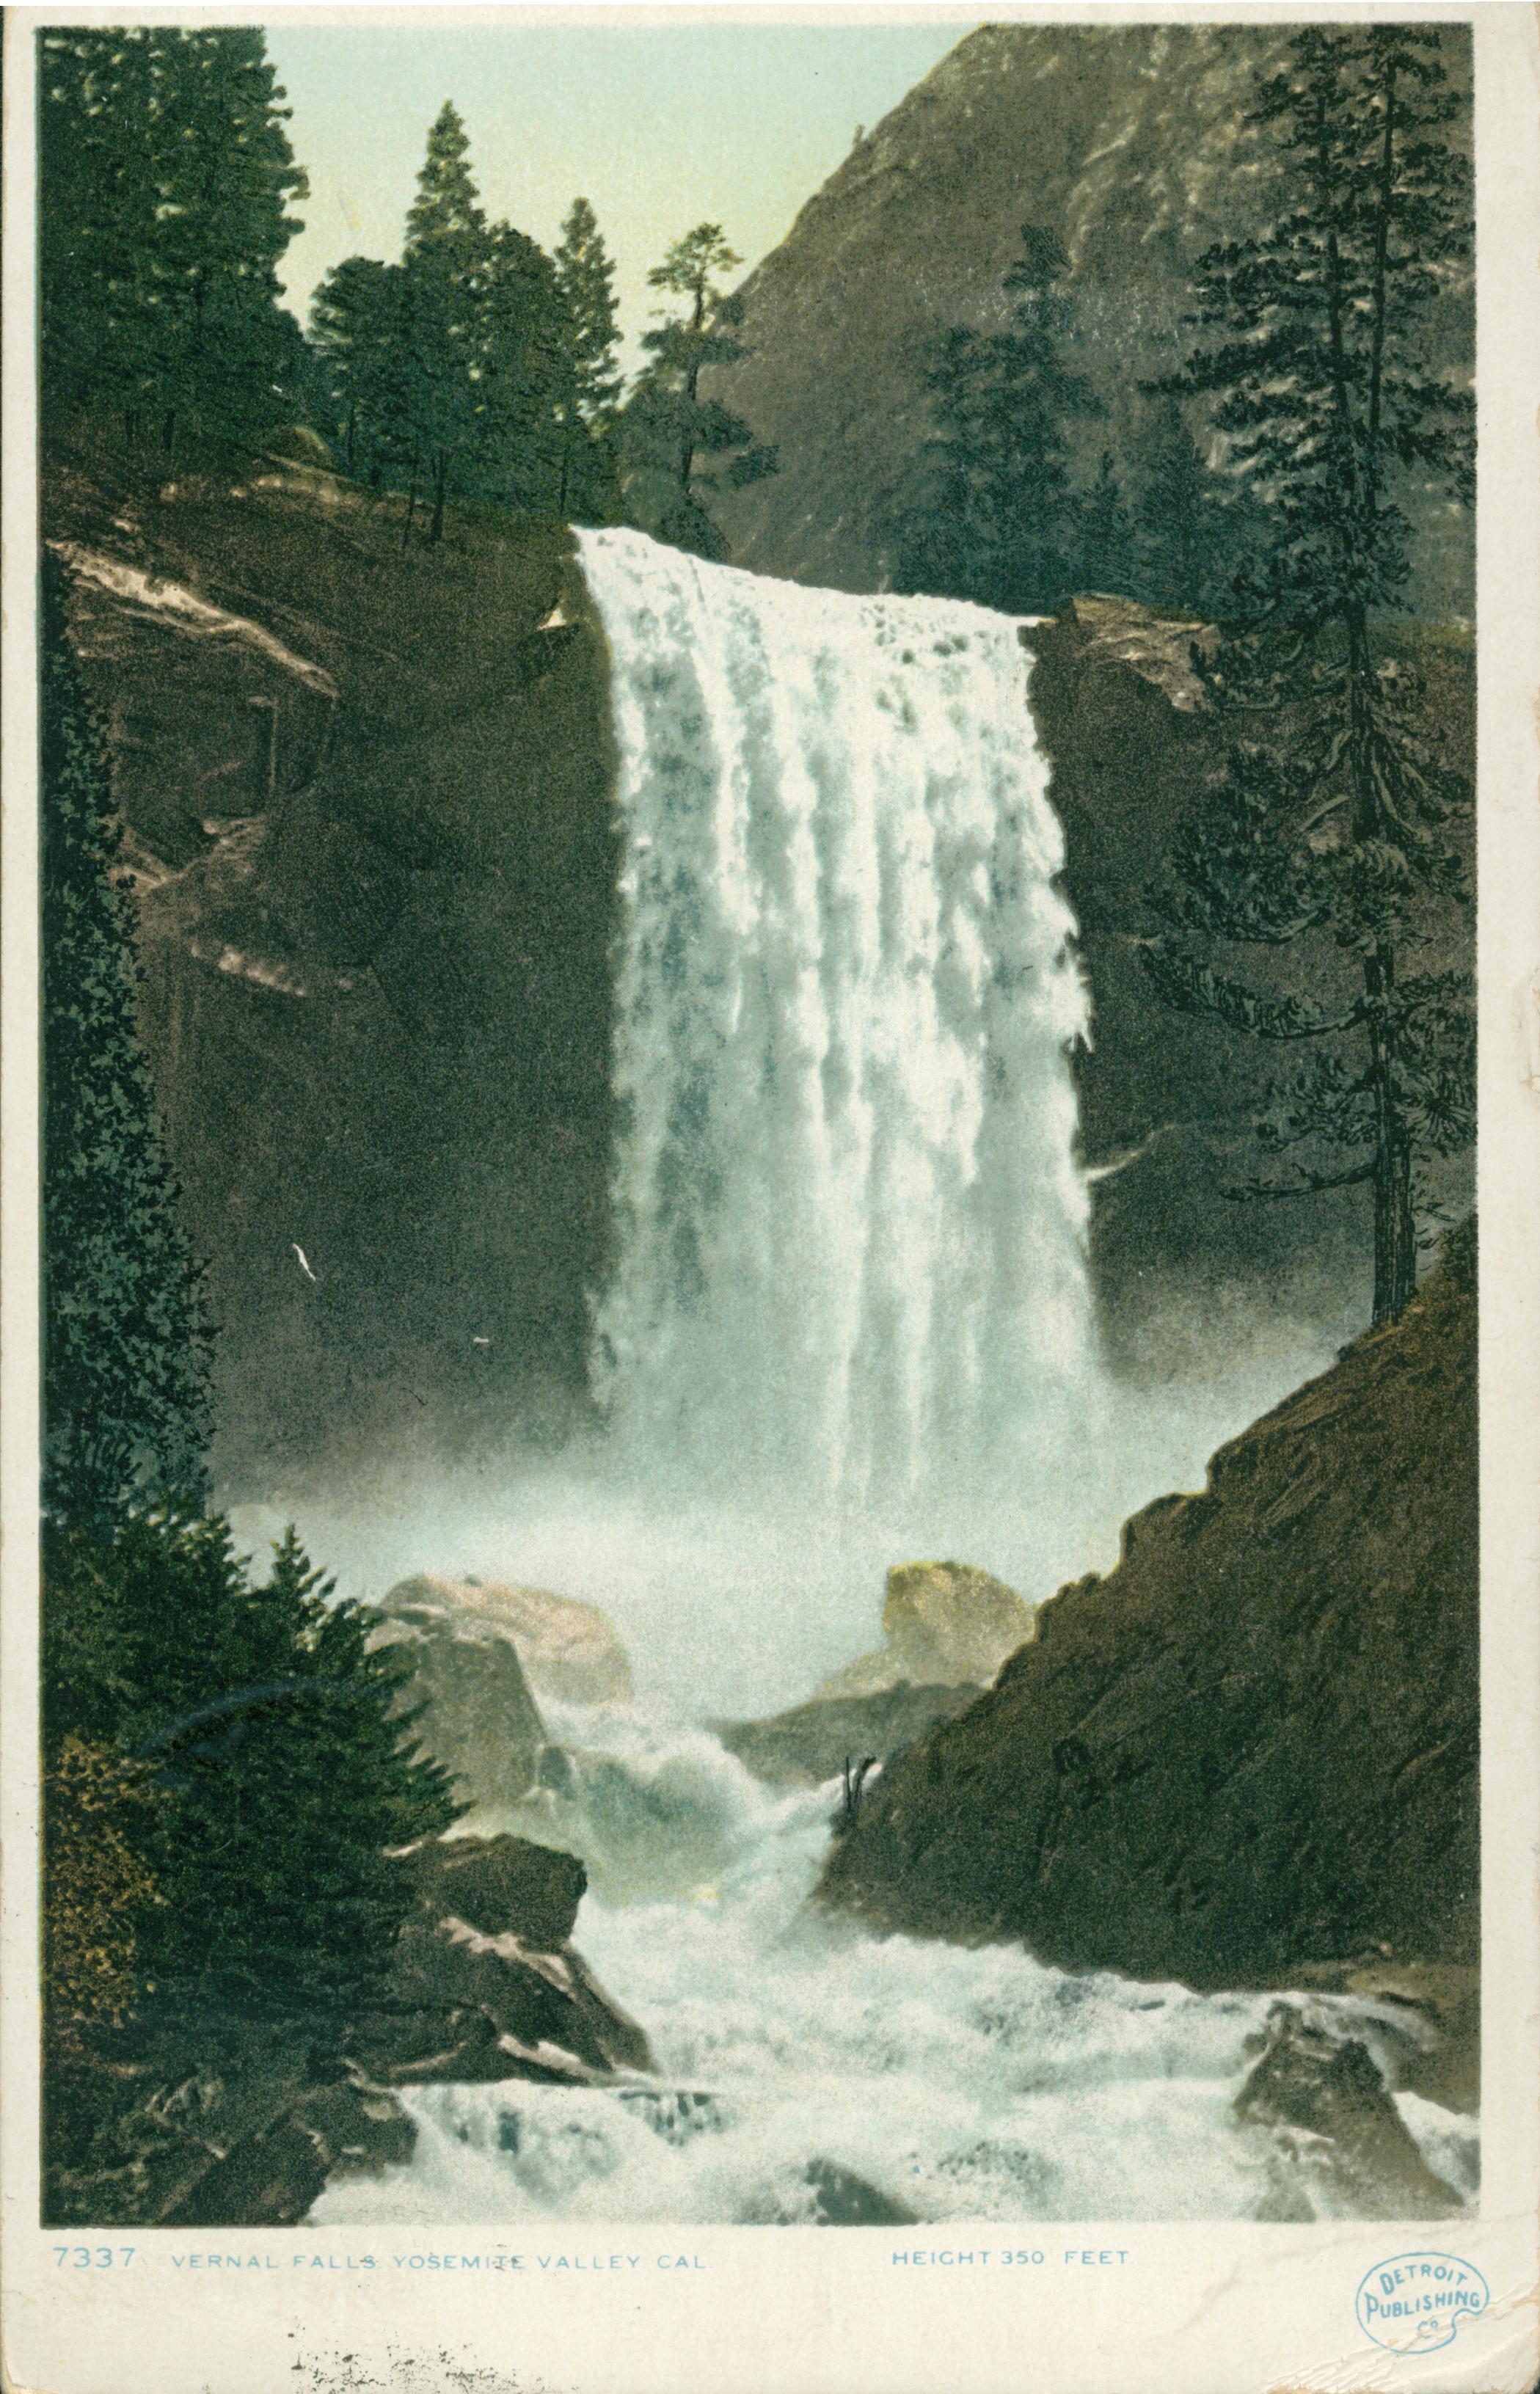 Shows a view of Vernal Falls